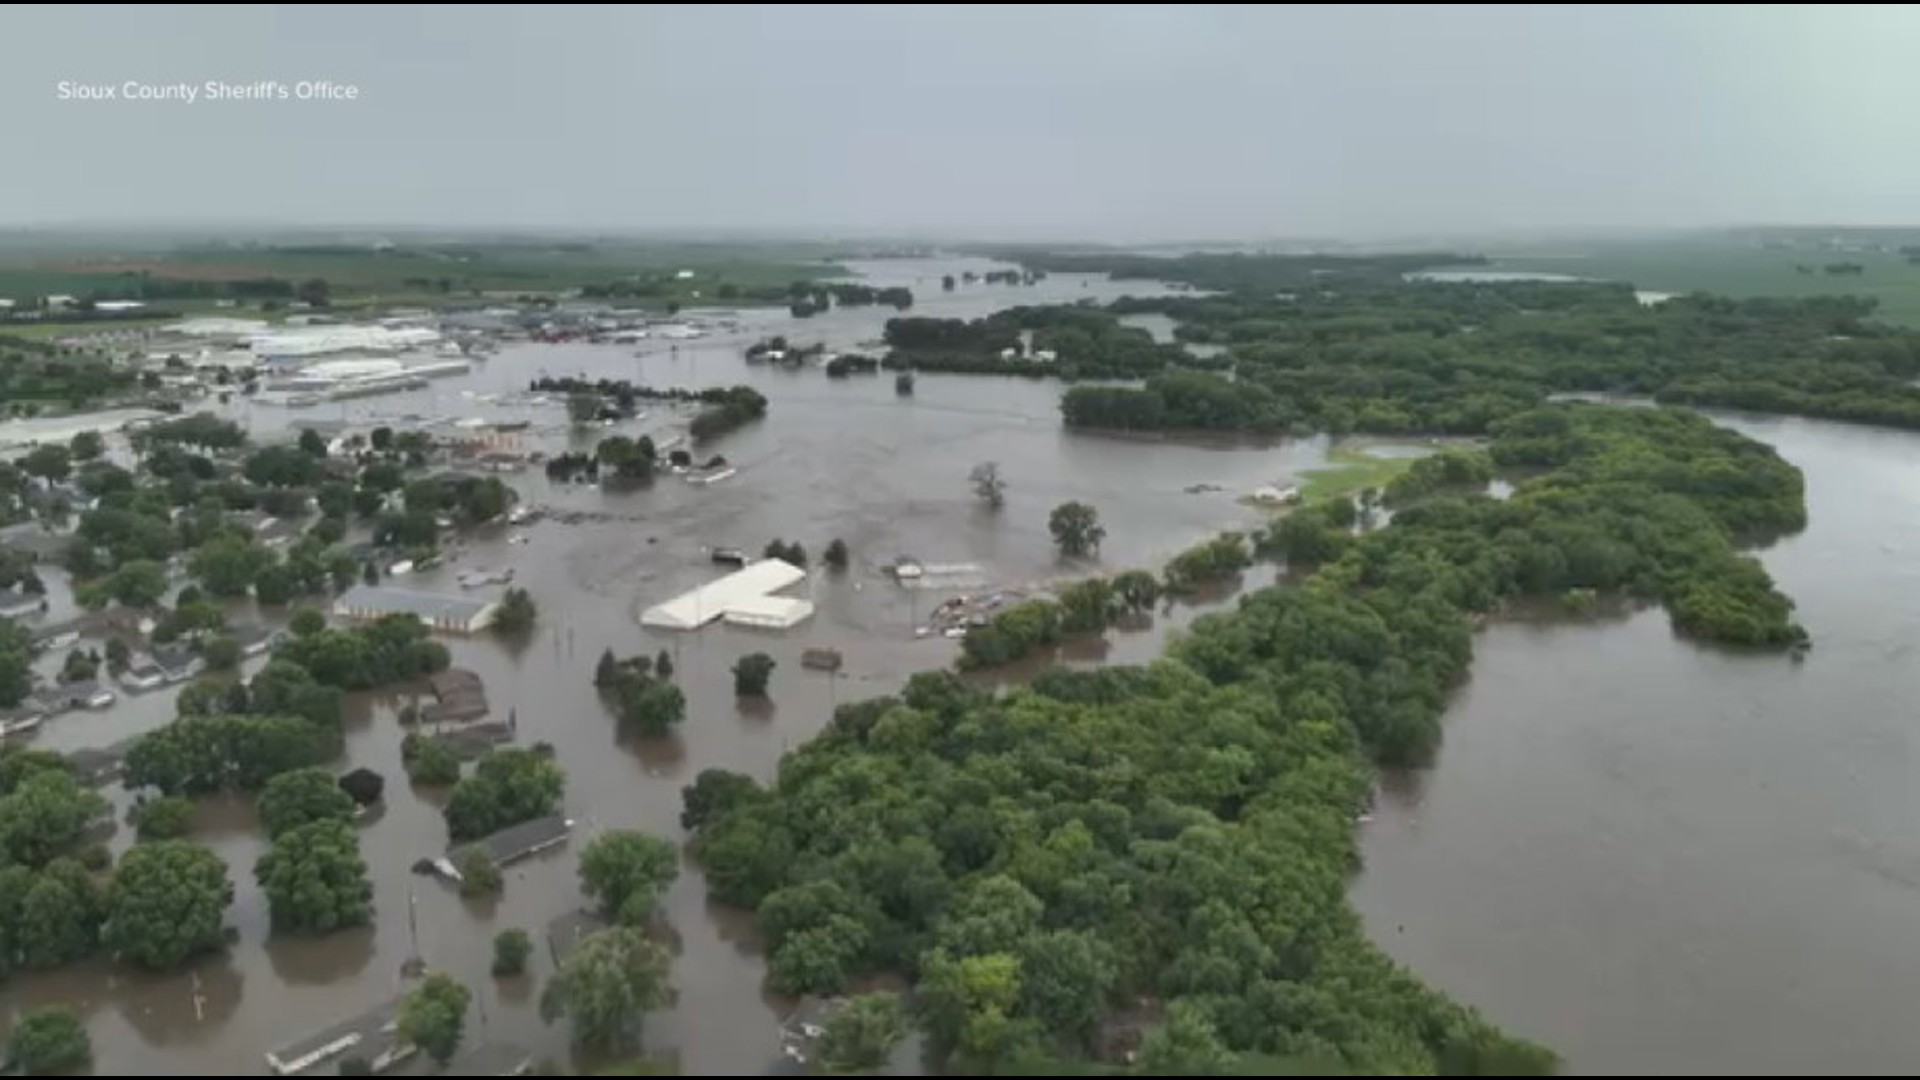 Around 1,900 properties saw impact from the flooding in northwest Iowa, as crews continue rescue and recovery efforts.